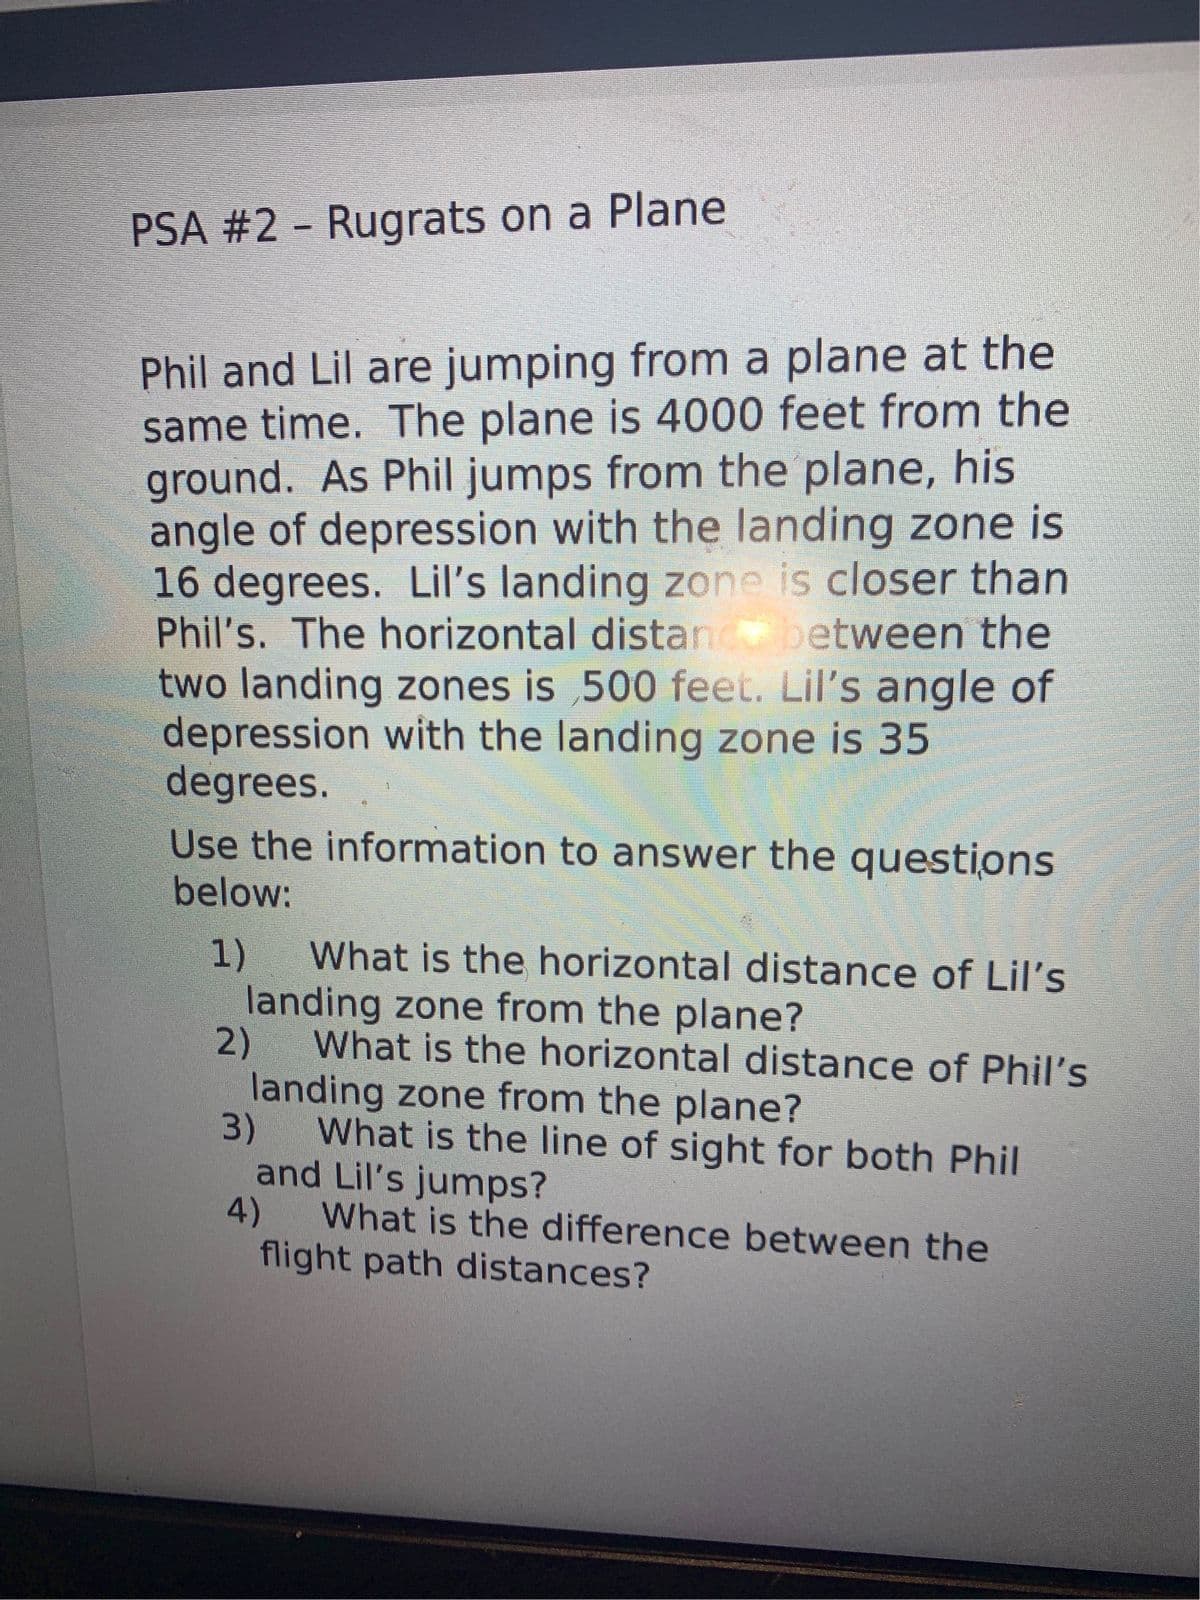 PSA #2 - Rugrats on a Plane
Phil and Lil are jumping from a plane at the
same time. The plane is 4000 feet from the
ground. As Phil jumps from the plane, his
angle of depression with the landing zone is
16 degrees. Lil's landing zone is closer than
Phil's. The horizontal distan between the
two landing zones is 500 feet. Lil's angle of
depression with the landing zone is 35
degrees.
Use the information to answer the questions
below:
1)
landing zone from the plane?
What is the horizontal distance of Lil's
2)
What is the horizontal distance of Phil's
landing zone from the plane?
3)
What is the line of sight for both Phil
and Lil's jumps?
4)
What is the difference between the
flight path distances?
